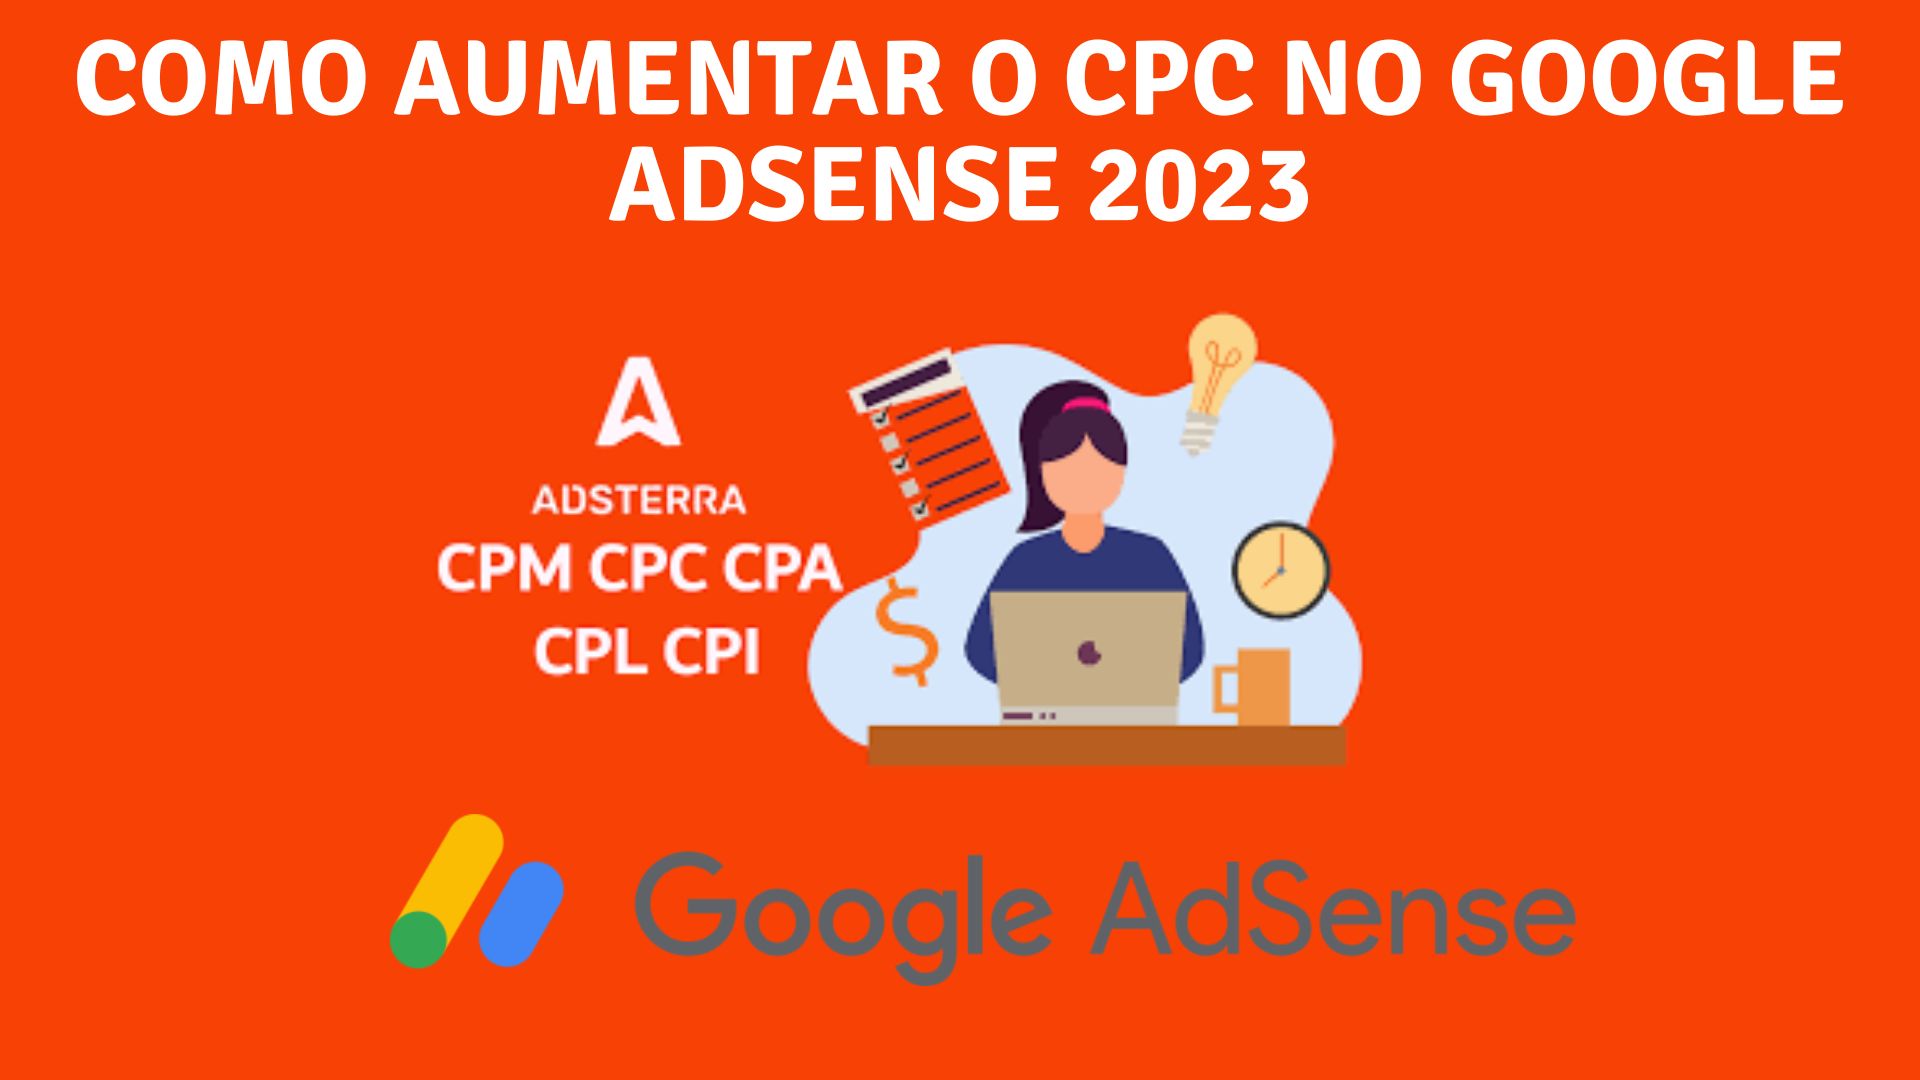 How to increase cpc in google adsense 2023